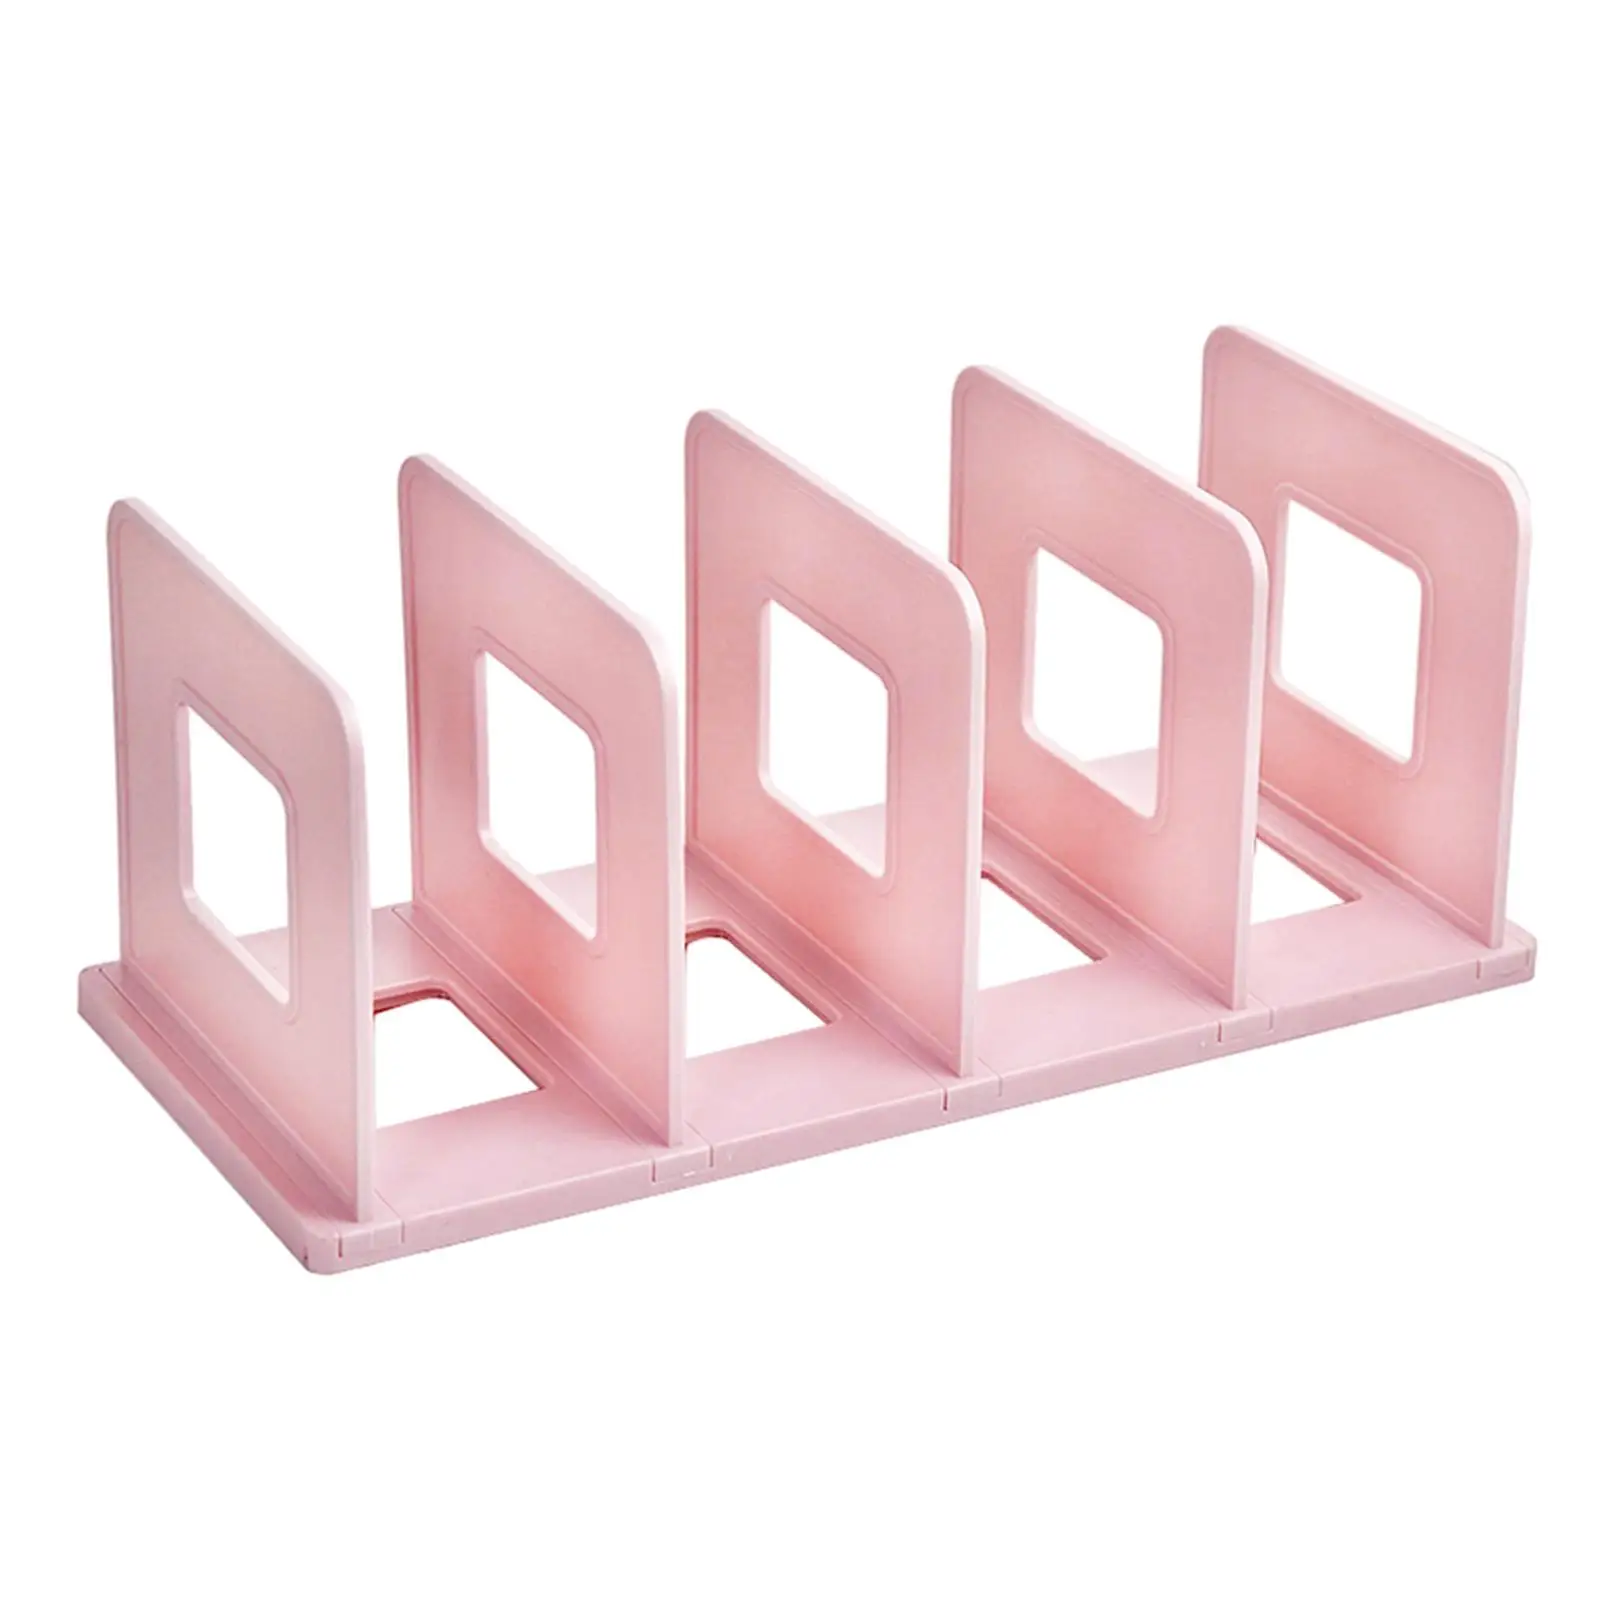 Desktop Book Organizer Books Holder Table for Home Office Book Ends Simple Support Book Storage Rack Magazine File Organizer